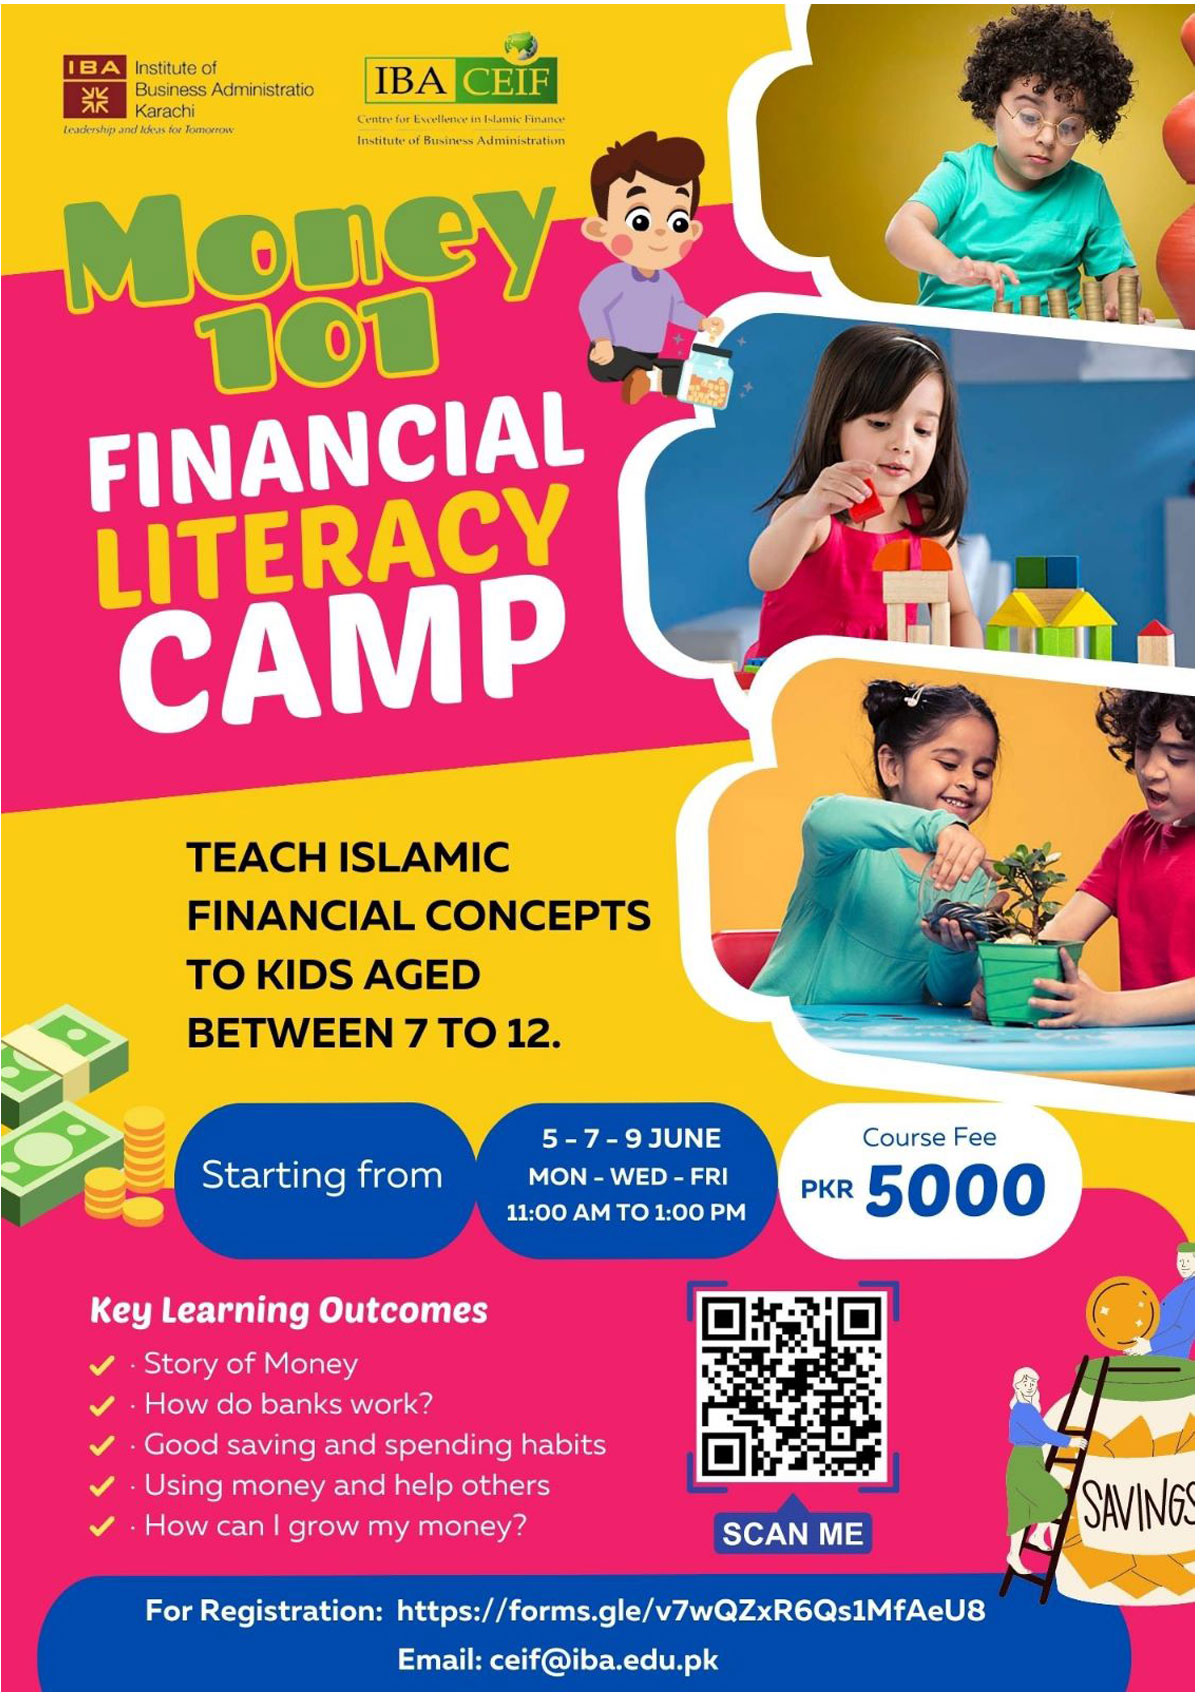 MONEY 101- The Financial Literacy Summer Camp for Kids